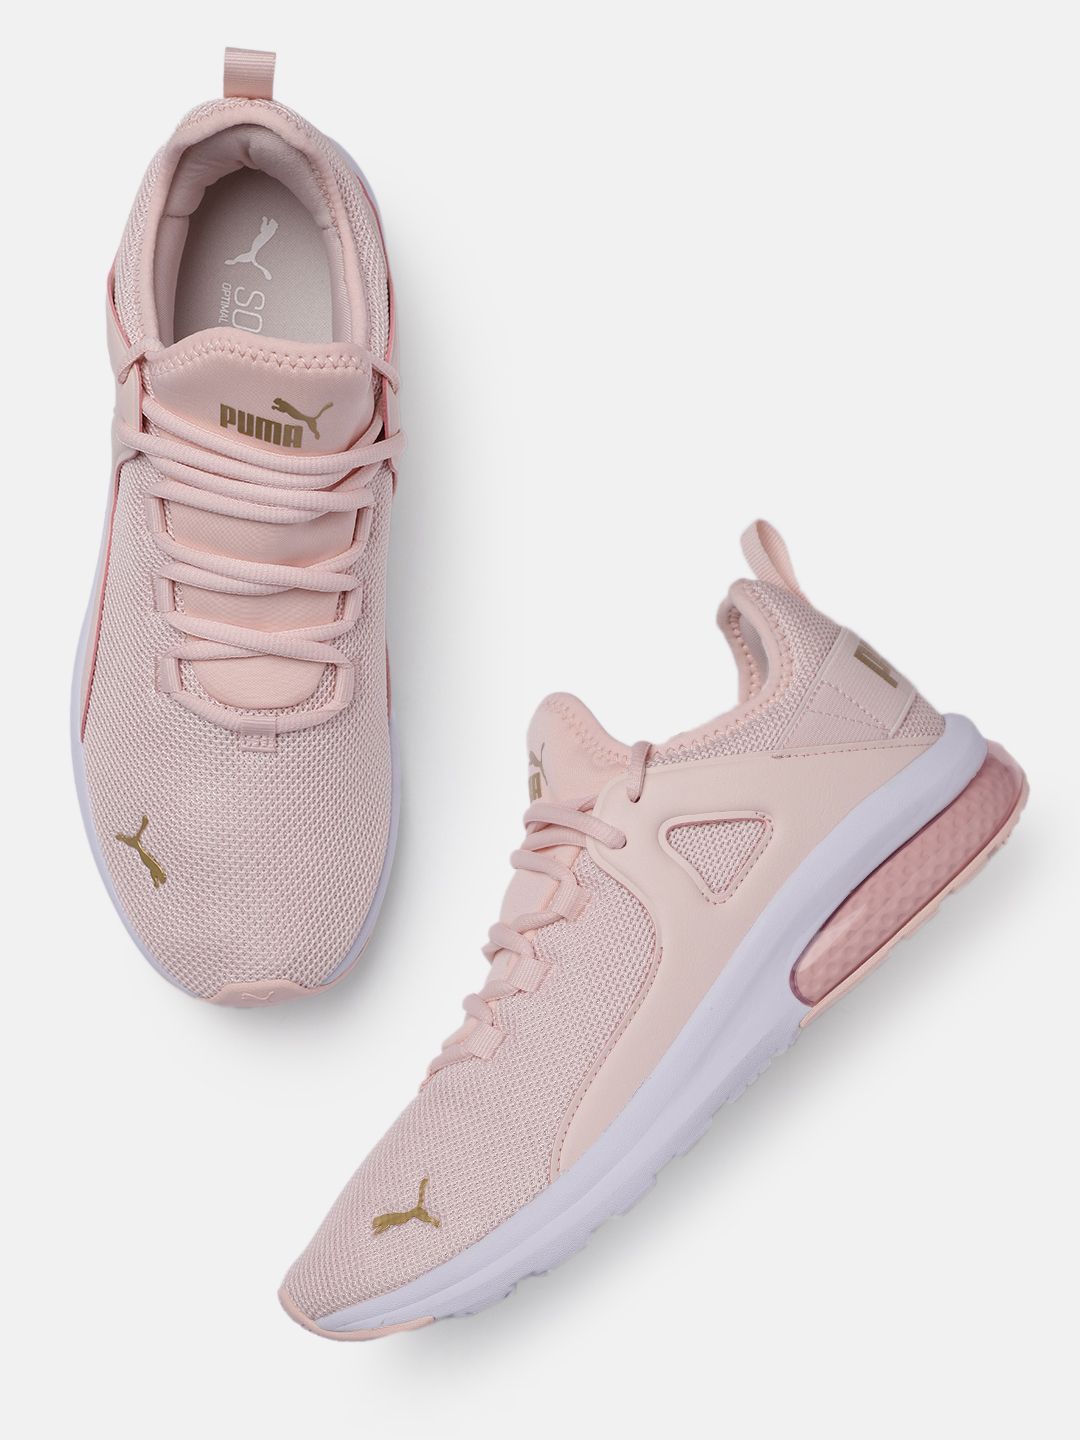 Puma Unisex Pink Electron 2.0 SoftFoam Sneakers Price in India